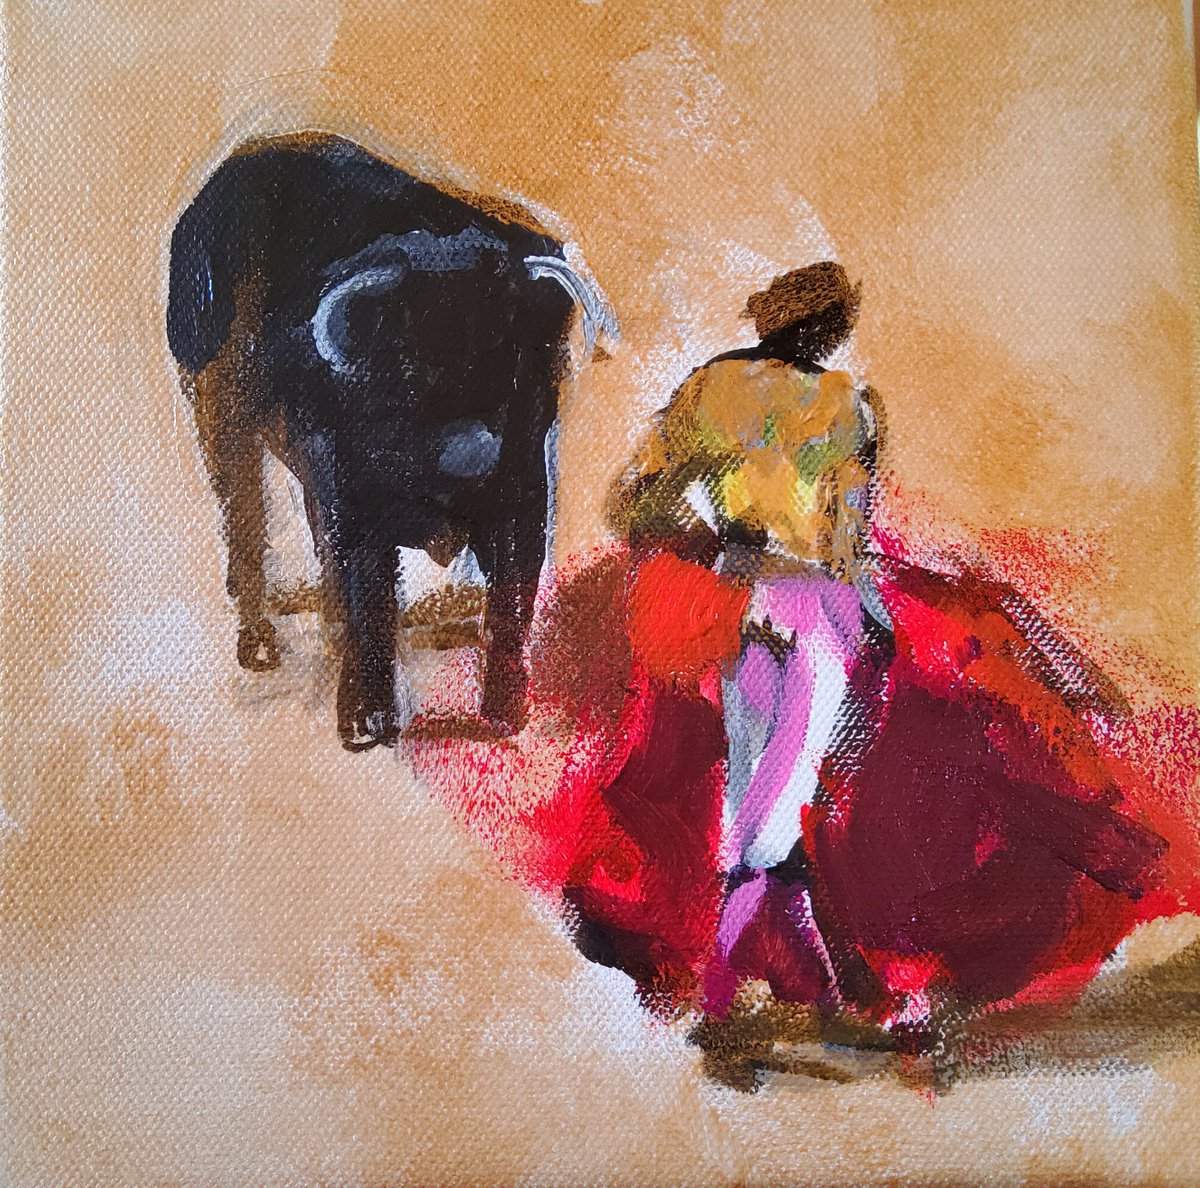 Little tauromaquia 1 by Marina Del Pozo